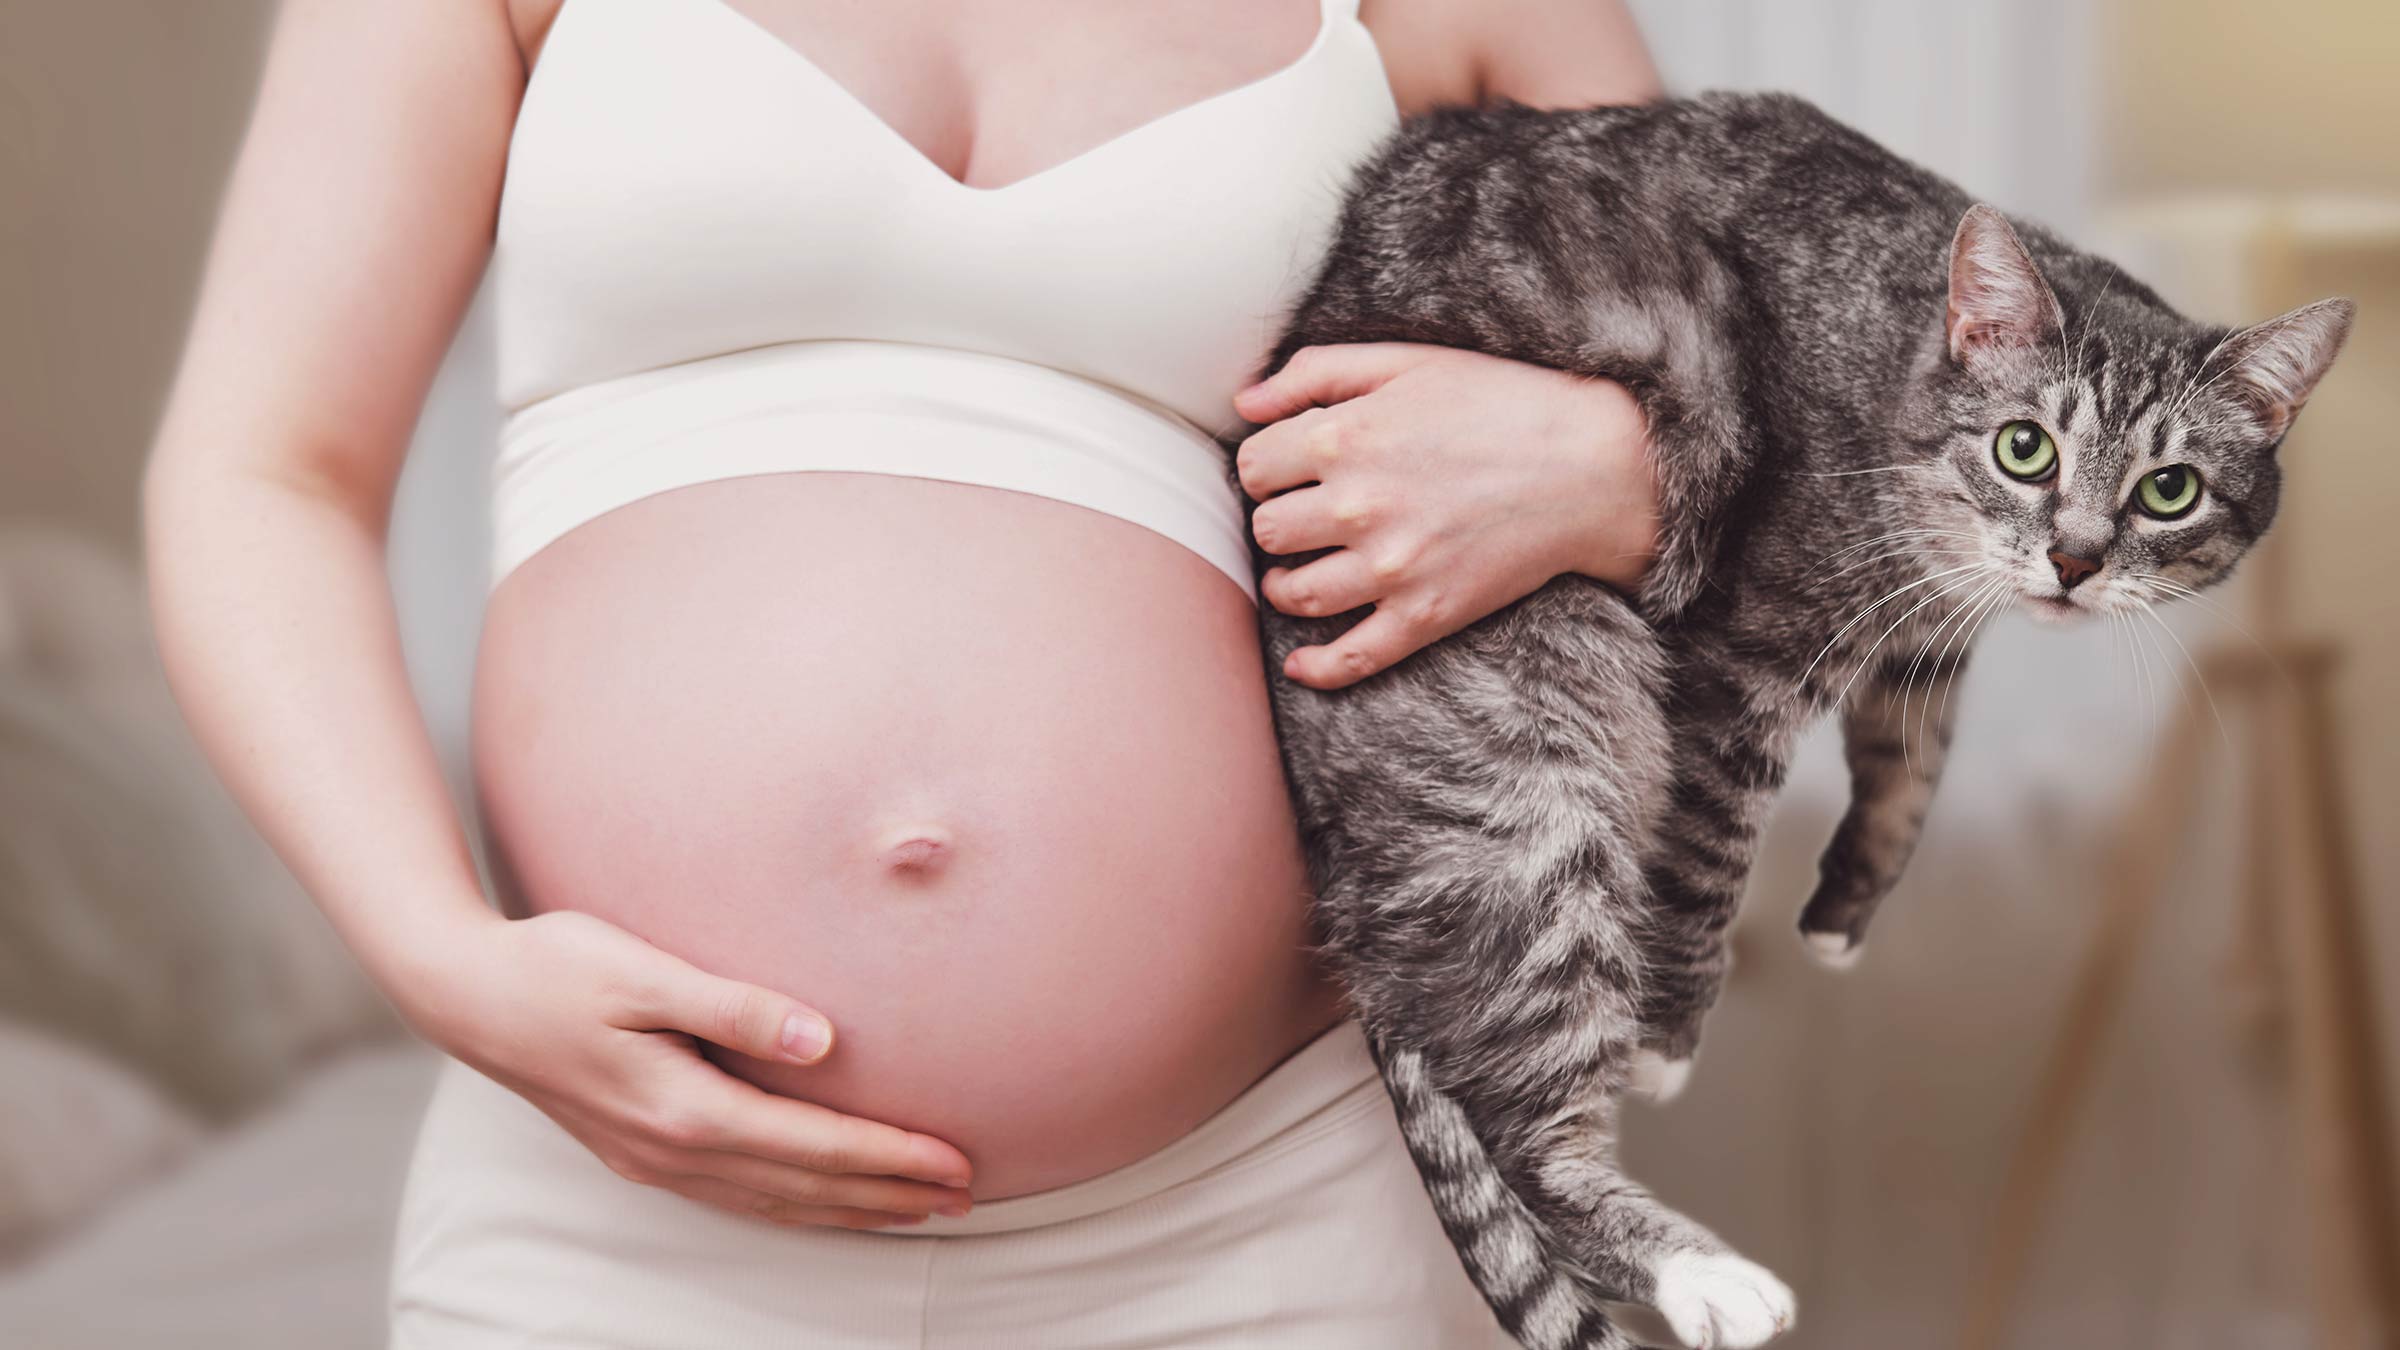 Pregnant woman with a cat in her hands